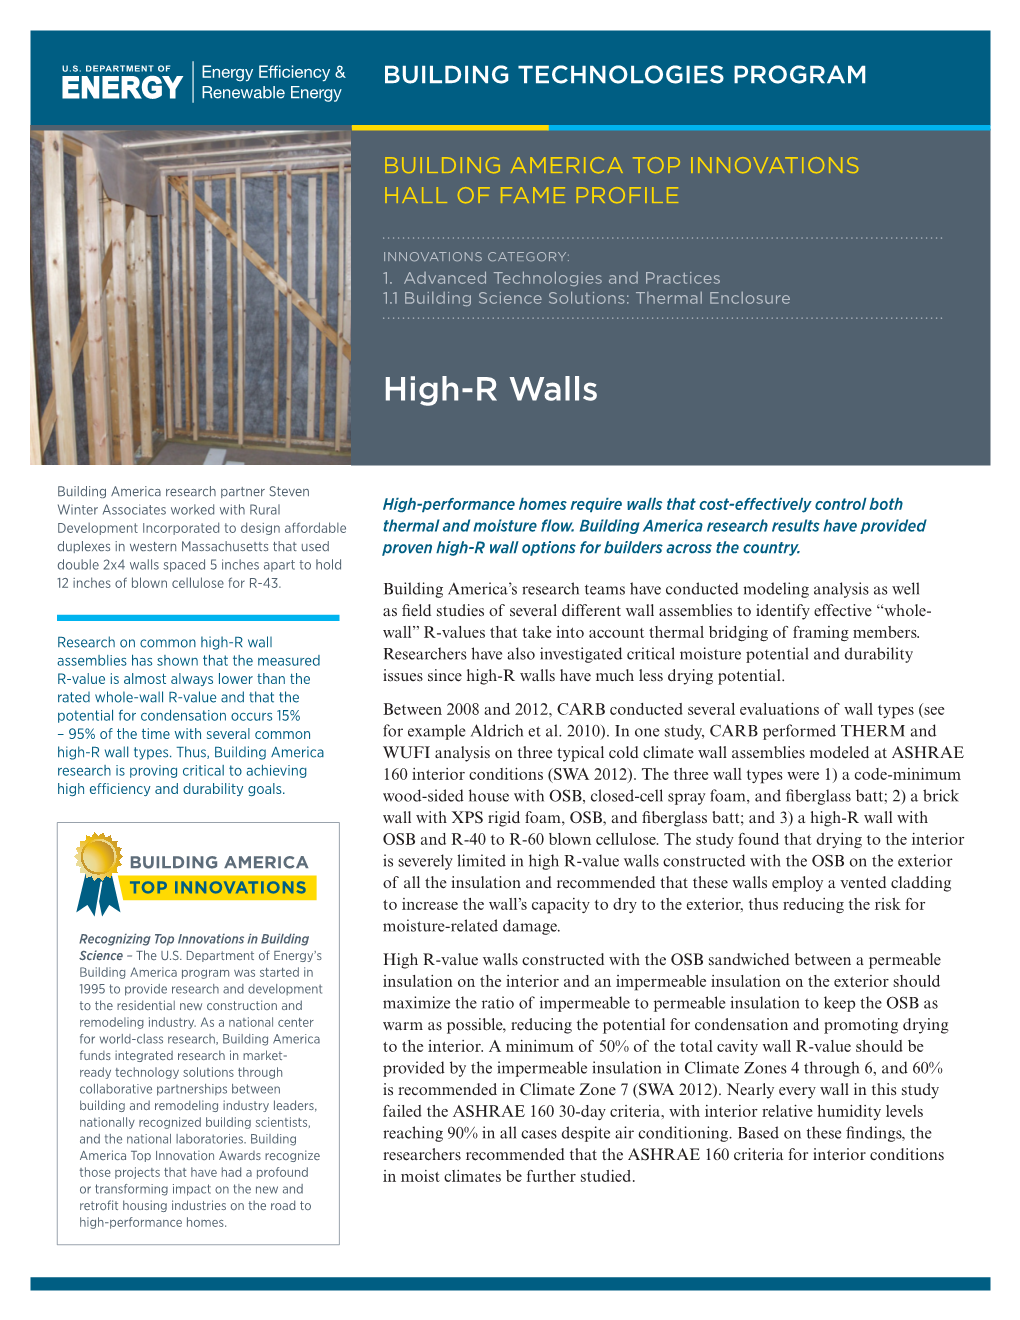 Building America Top Innovations Hall of Fame Profile – High-R Walls